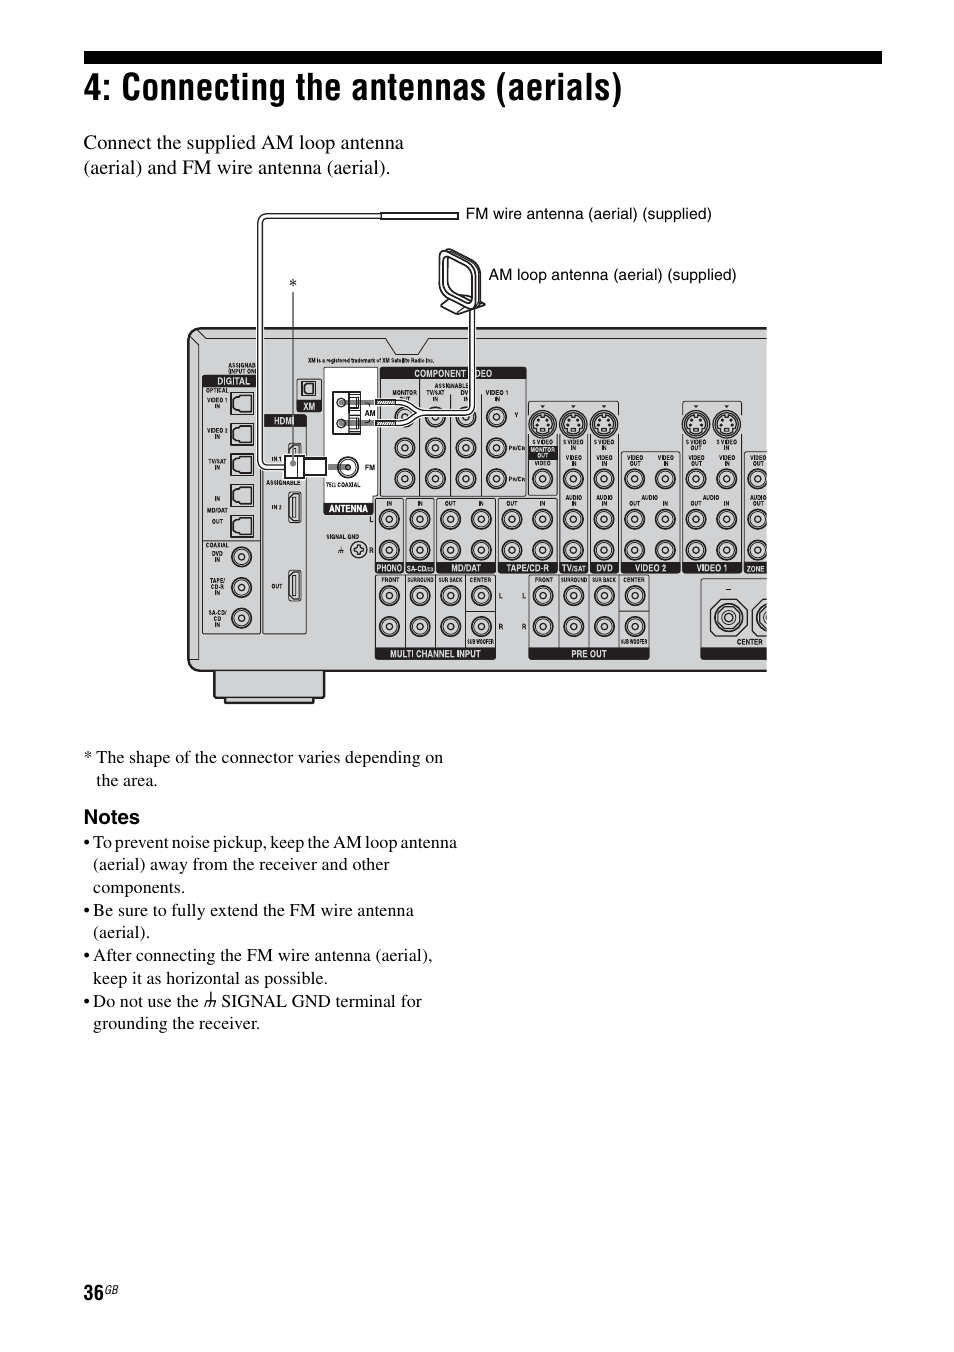 Connecting the antennas (aerials), Connecting the antennas (aerials)” (p, E 36) | Sony STR-DG1000 User Manual | Page 36 / 123